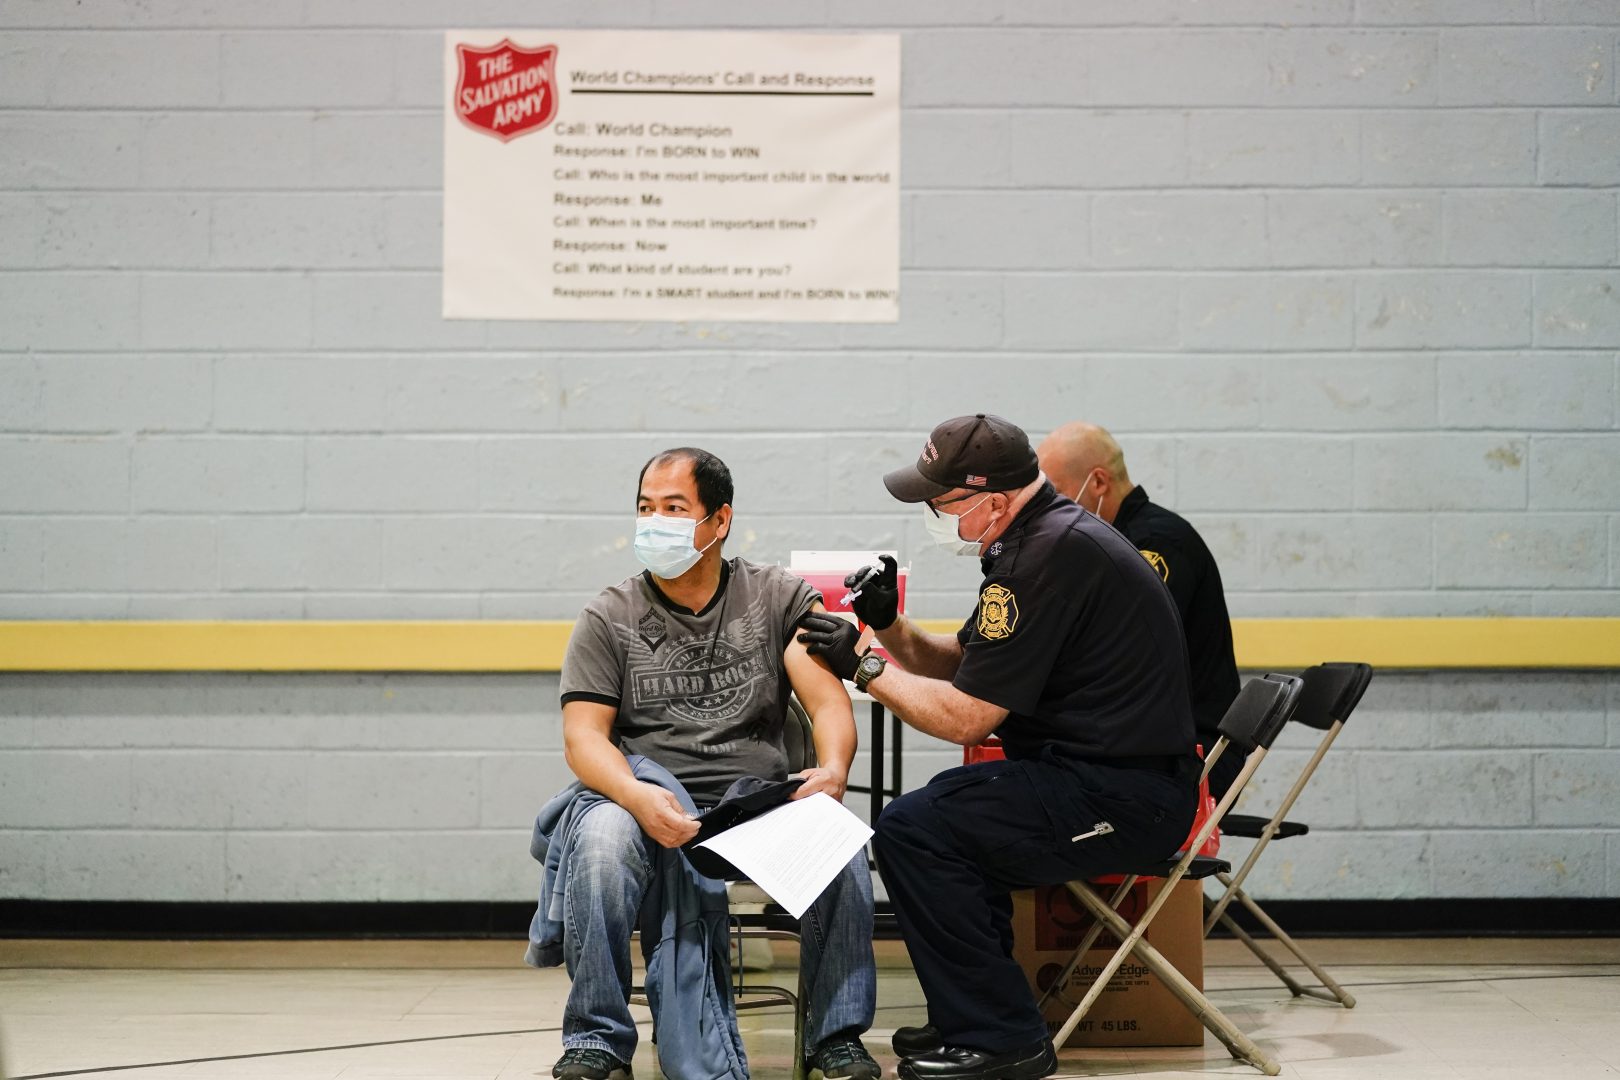 A member of the Philadelphia Fire Department administers the Johnson & Johnson COVID-19 vaccine to a person at a vaccination site setup at a Salvation Army location in Philadelphia, Friday, March 26, 2021.